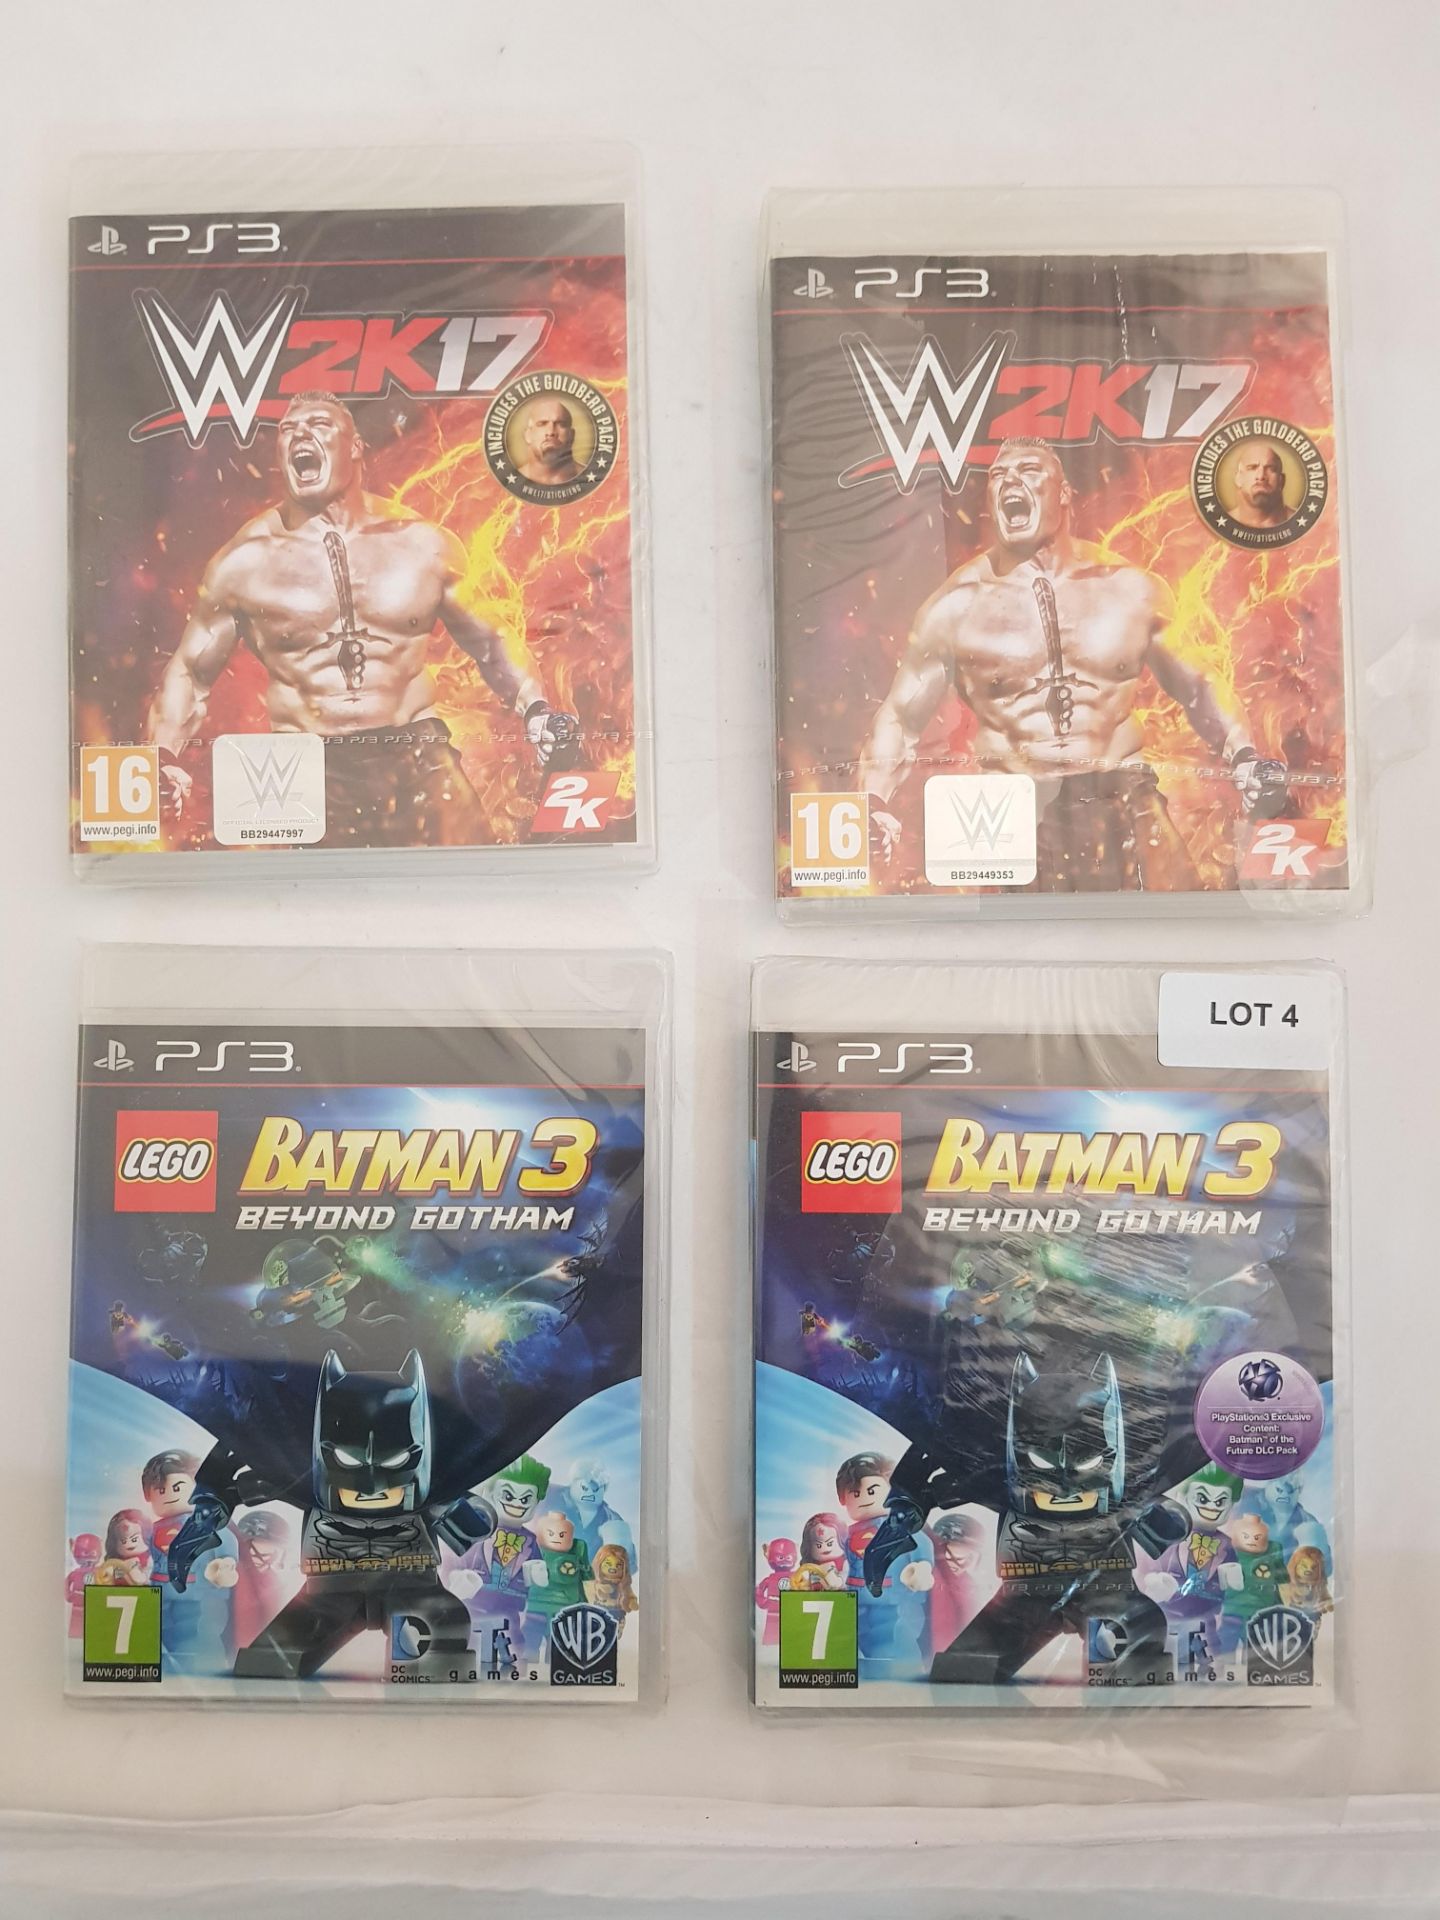 4 x PS3 games to included 2 x W2K17 and 2 x Lego batman 3 beyond Gotham